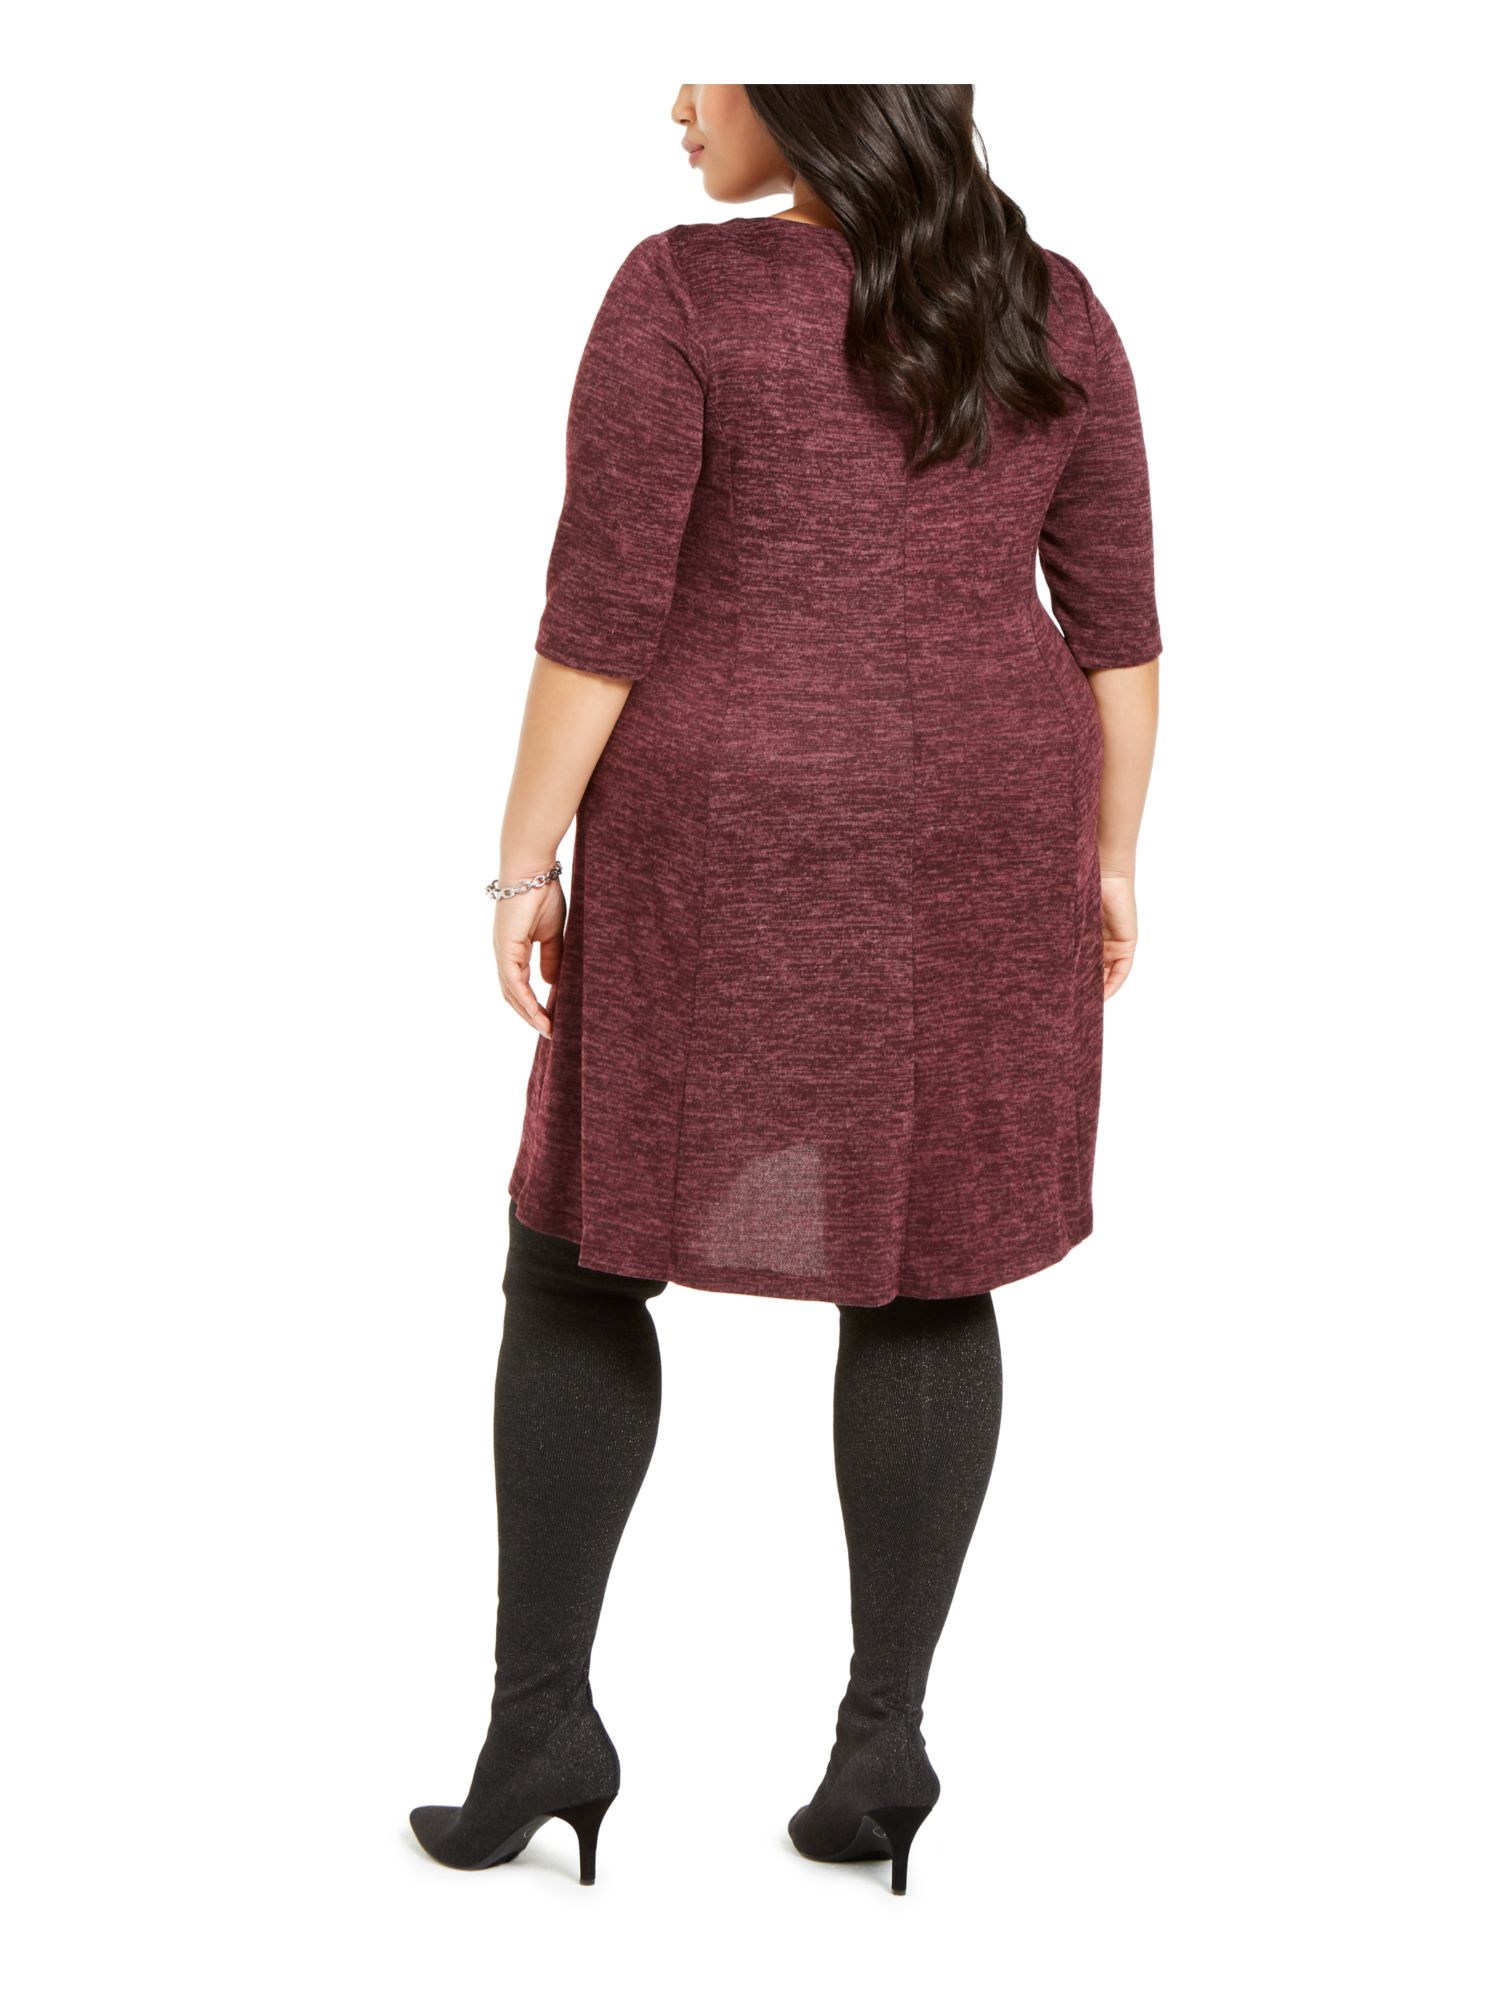 Connected Apparel CONNECTED Women's Burgundy 3/4 Sleeve Evening Dress Purple Size 18W